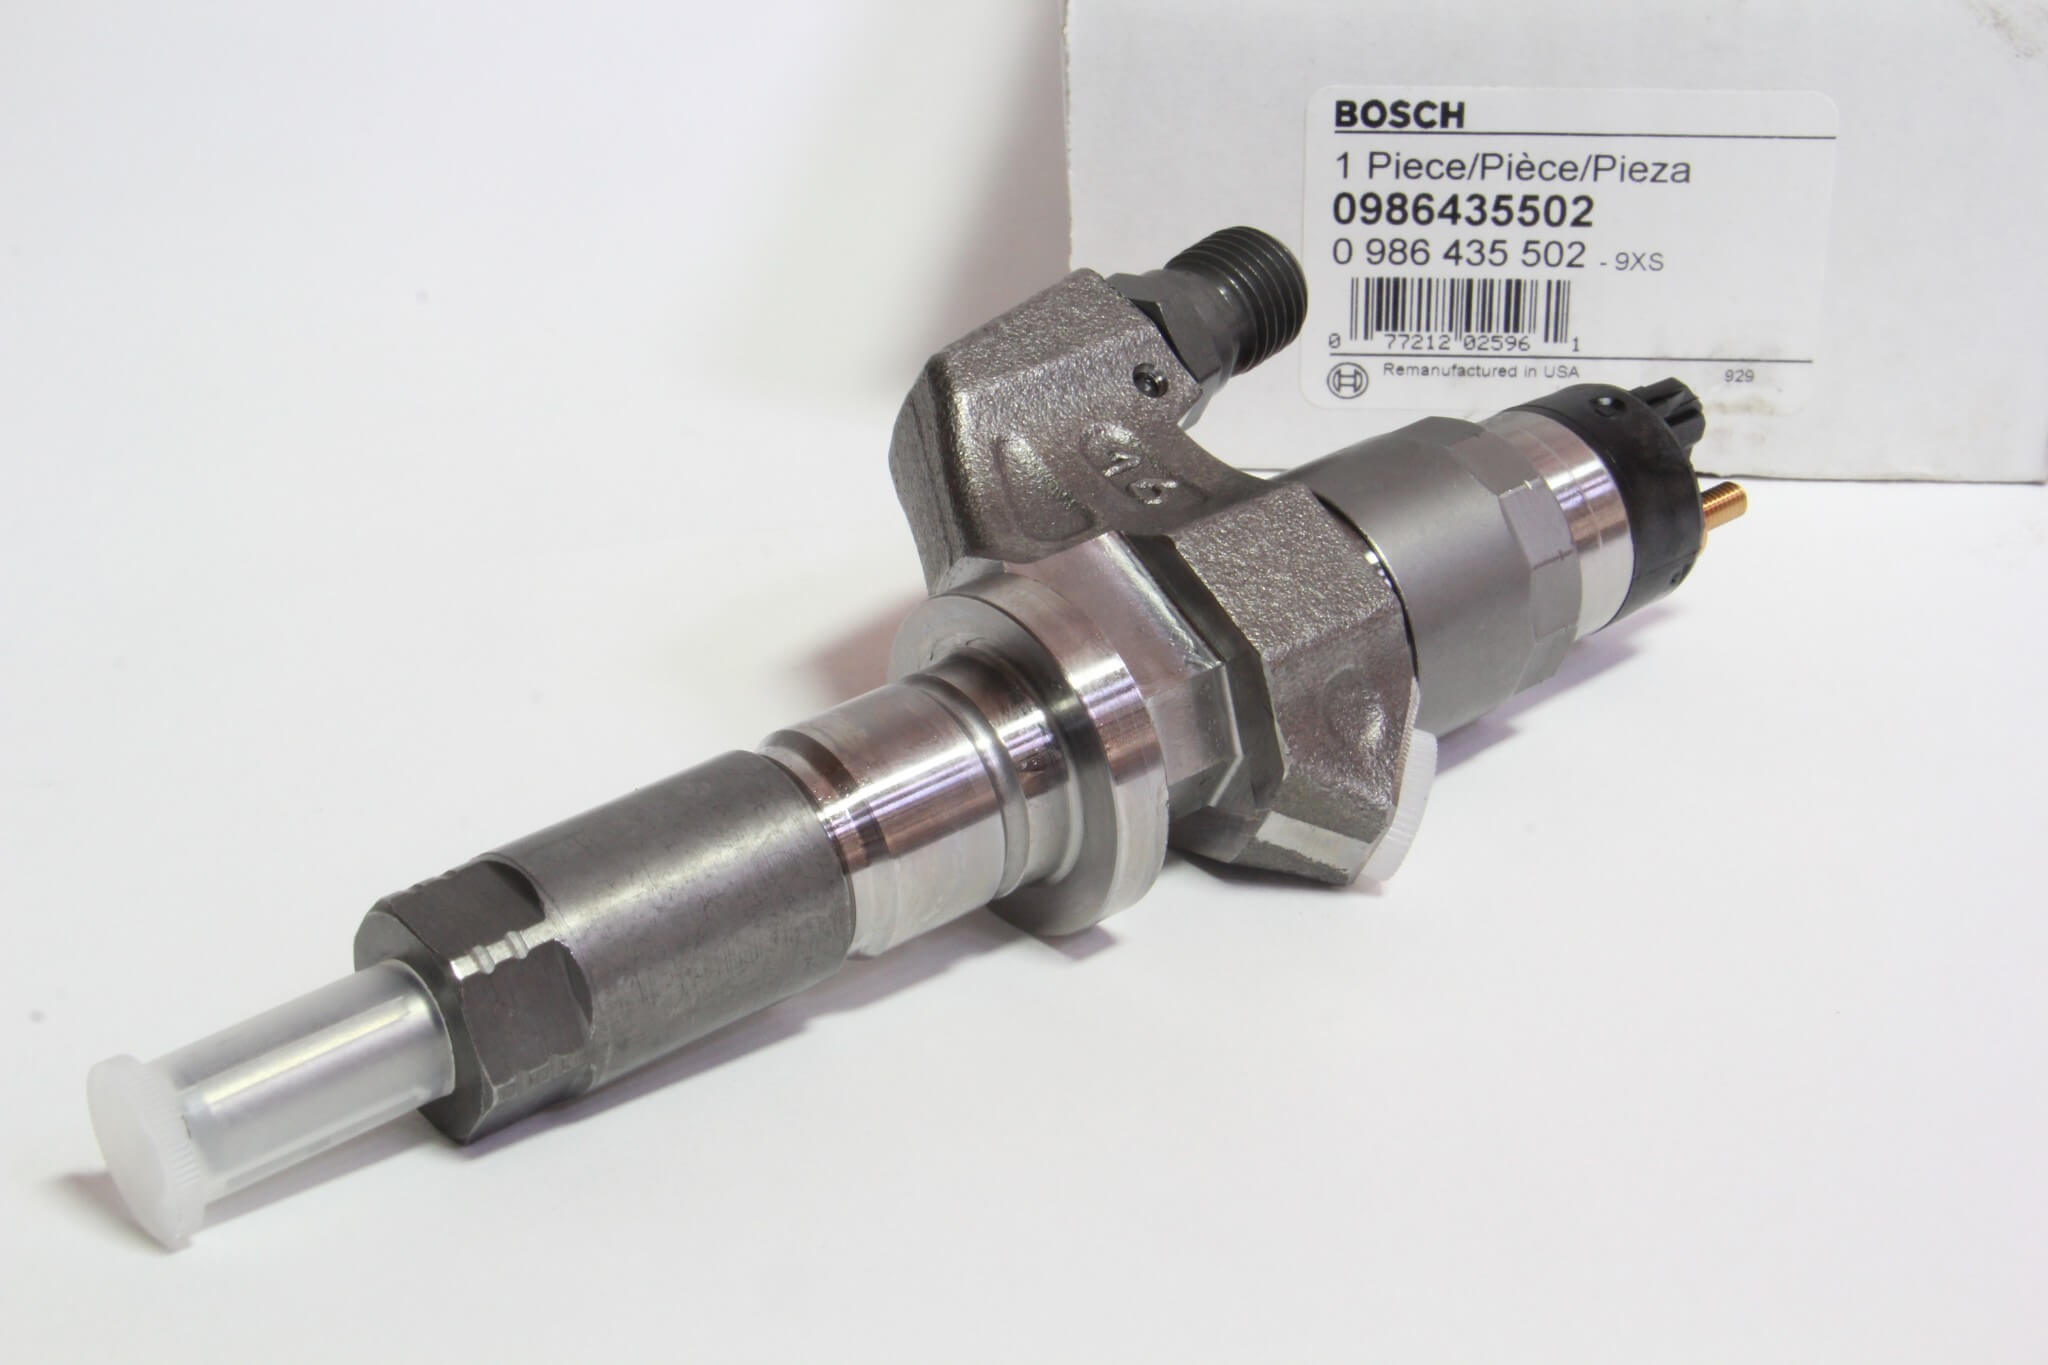 1. To eliminate fuel leaking into the oil, it was decided to replace all of the OEM fuel injectors with new Bosch injectors.